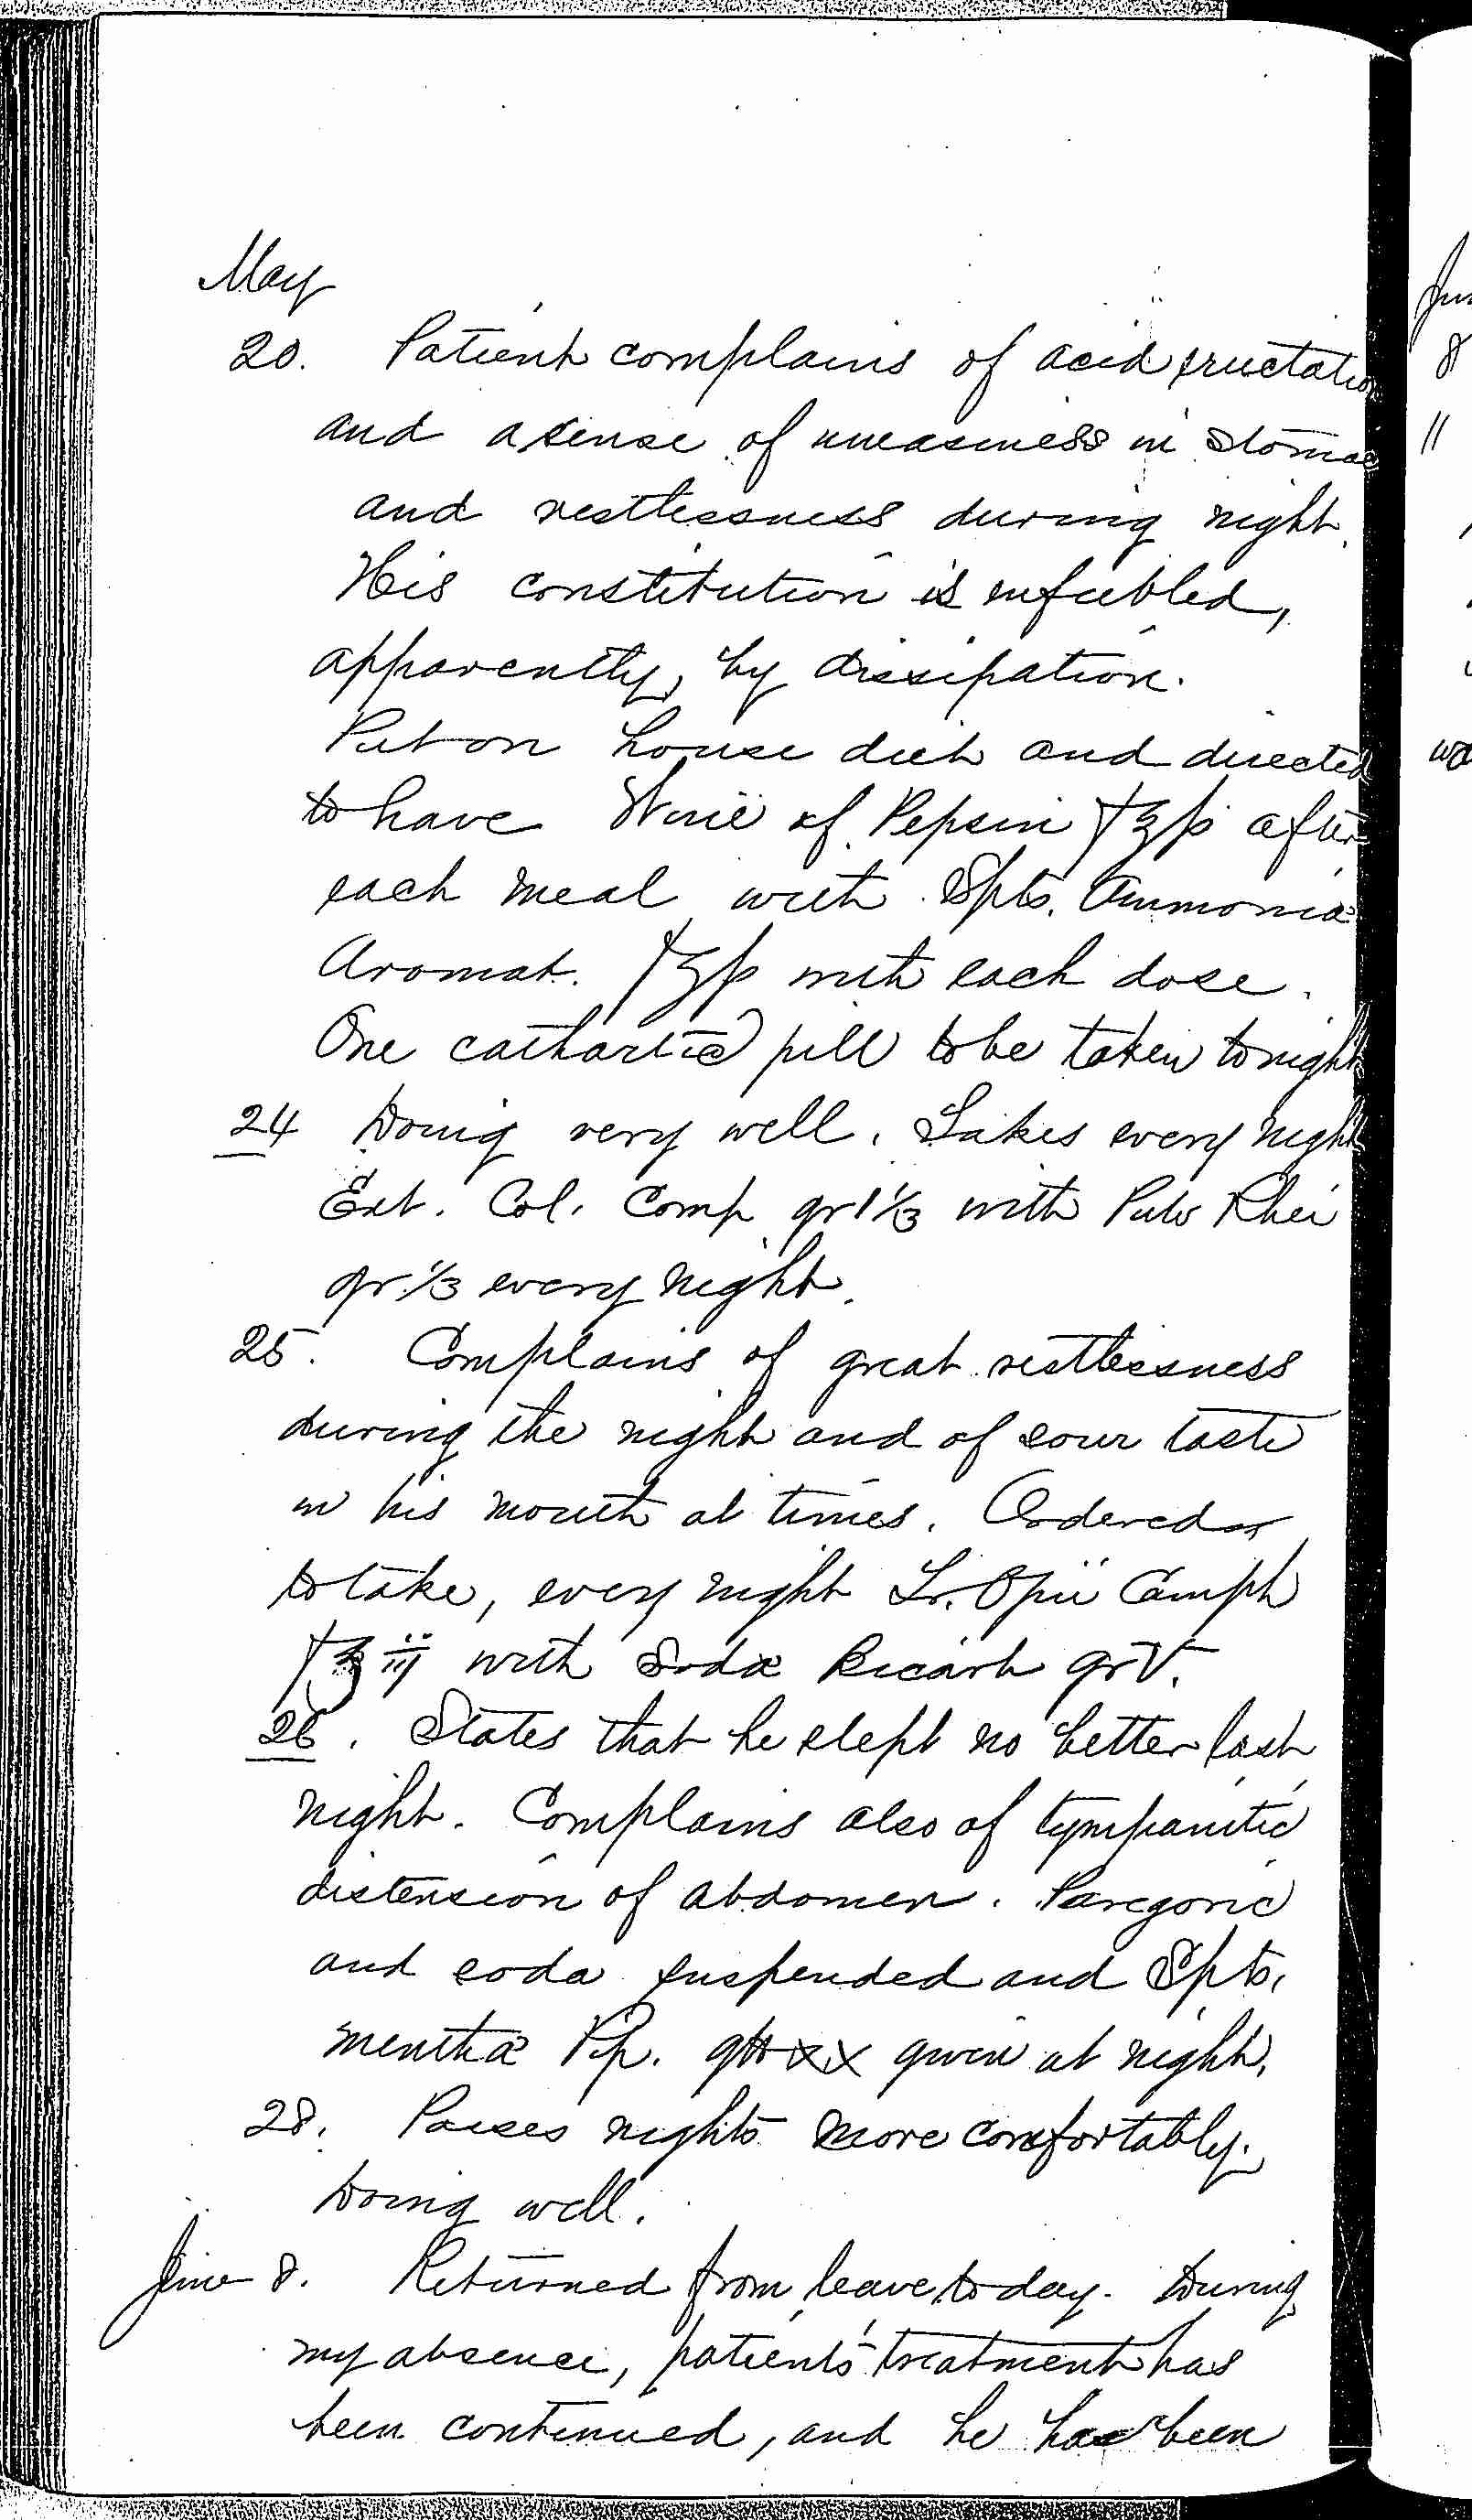 Entry for Joseph Meekins (page 2 of 3) in the log Hospital Tickets and Case Papers - Naval Hospital - Washington, D.C. - 1868-69